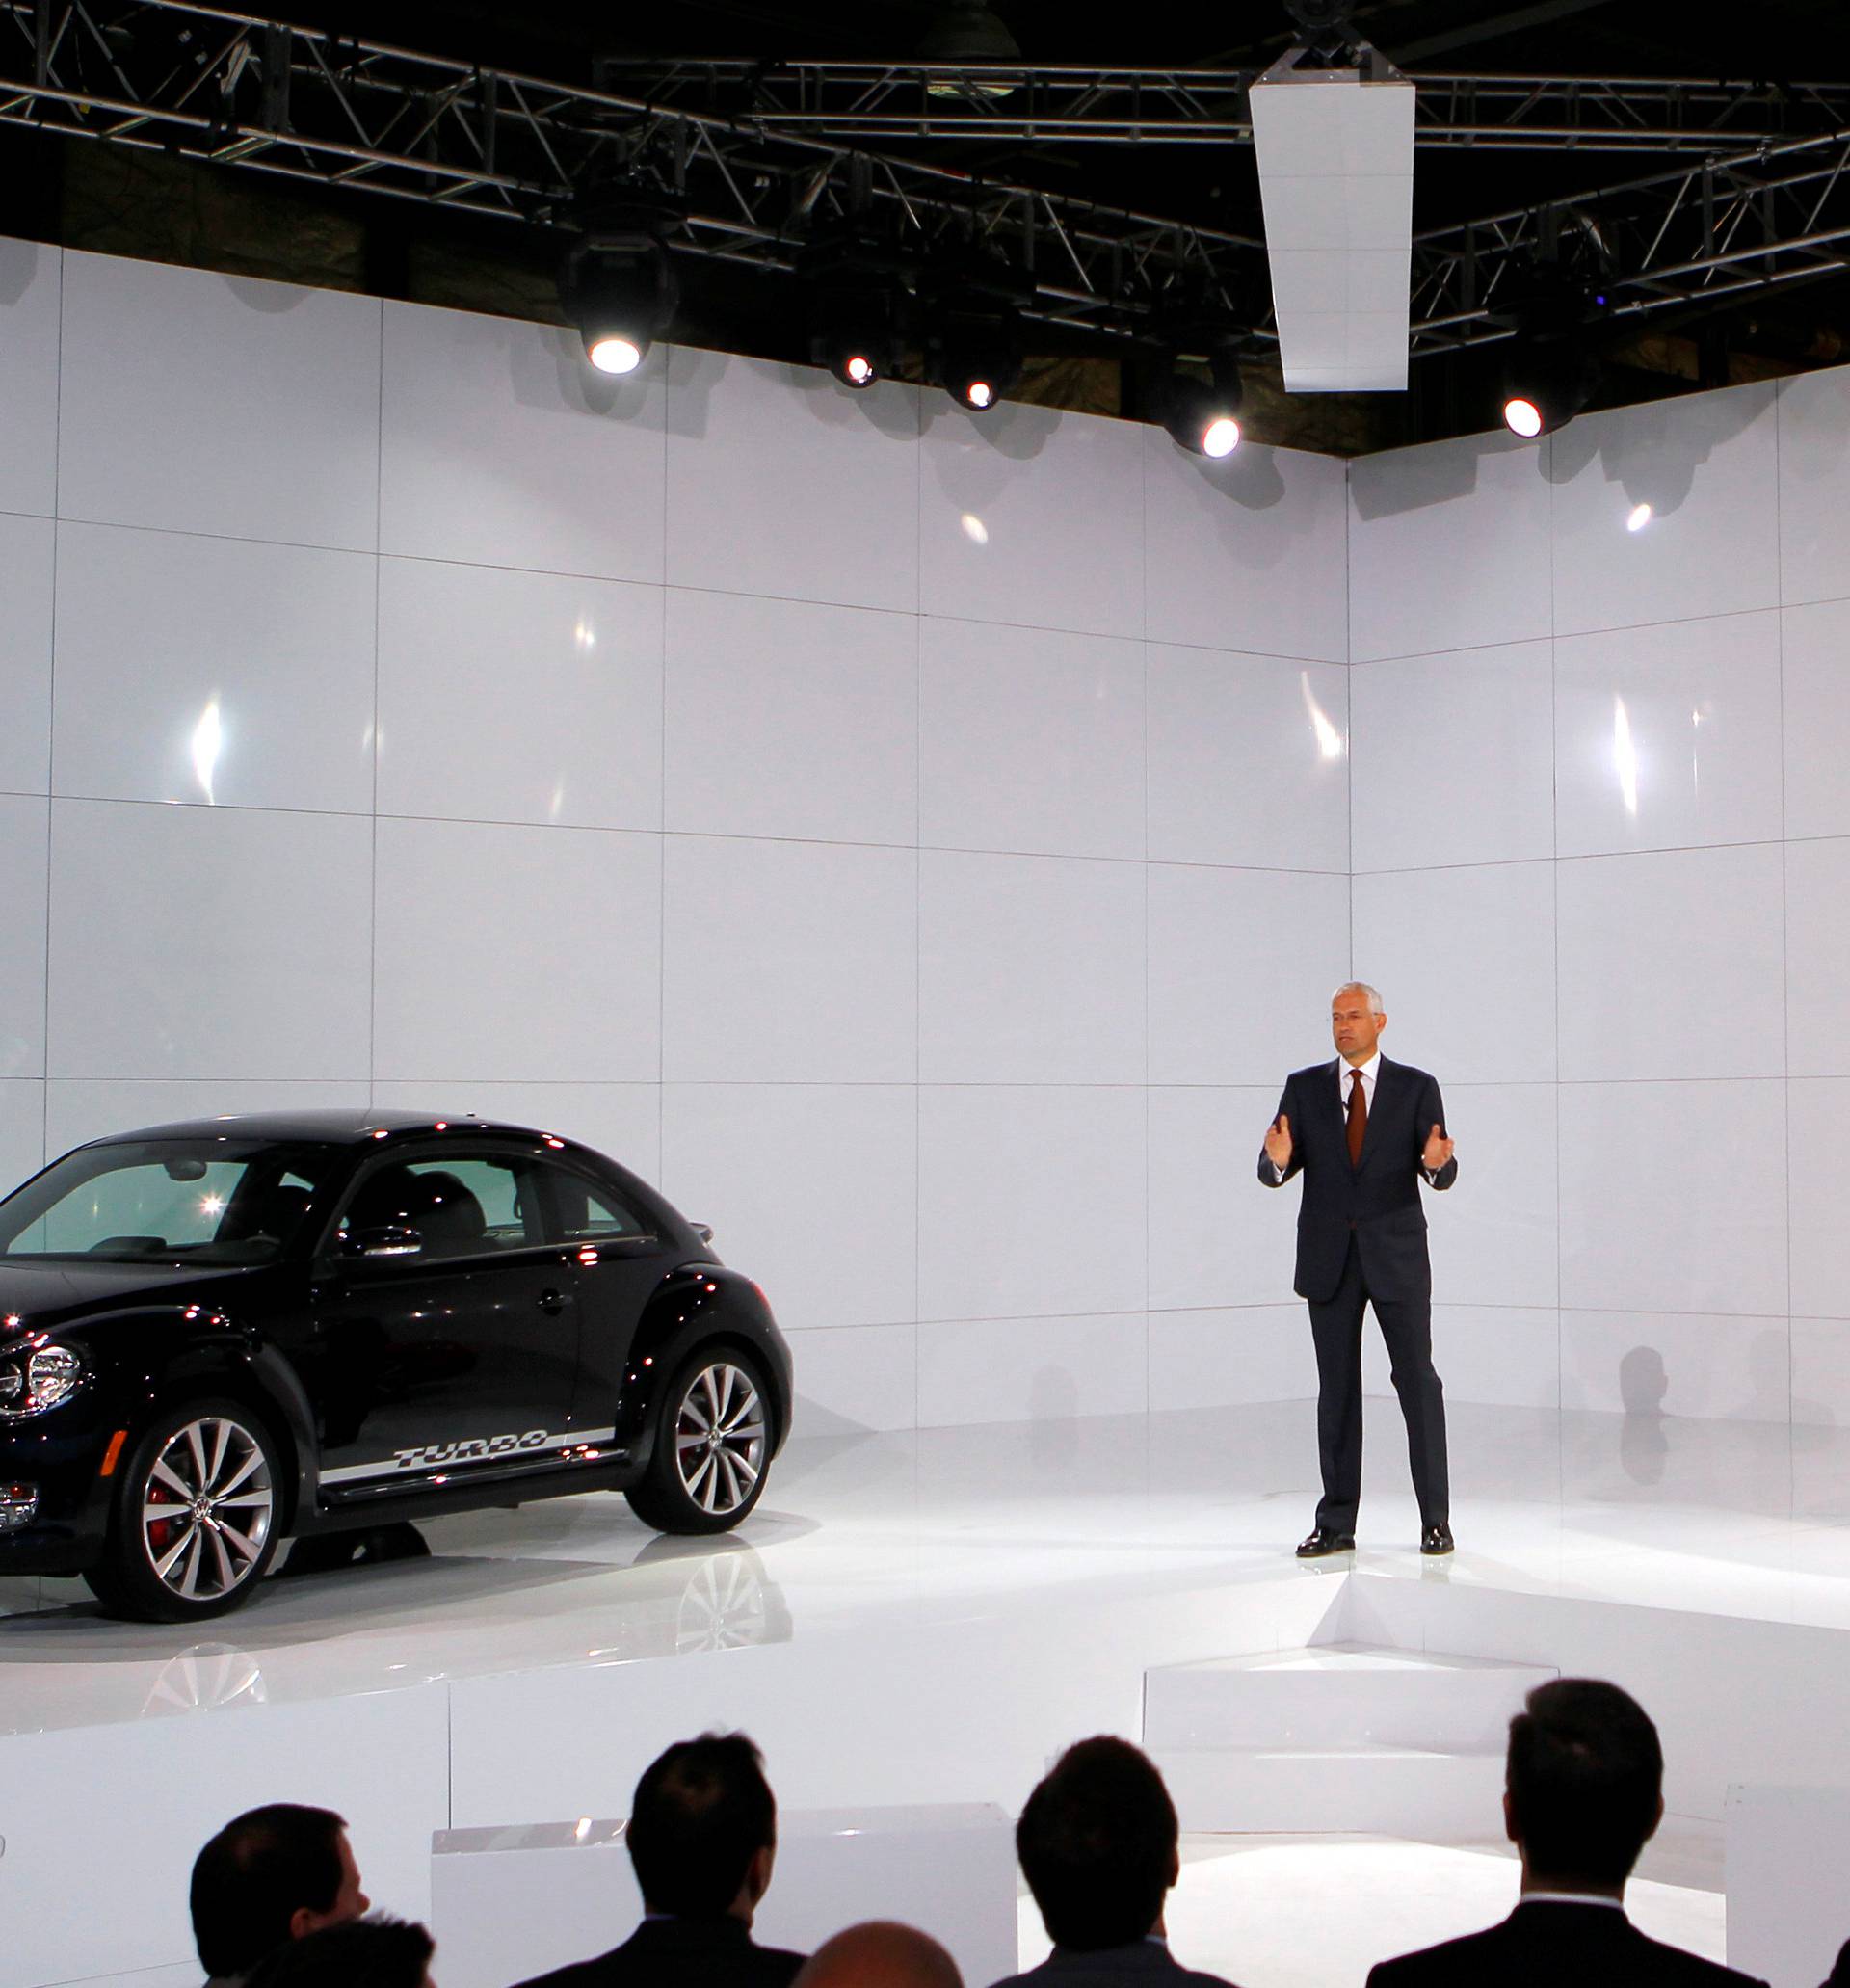 FILE PHOTO: Jonathan Browning speaks next to the 2012 Volkswagen Beetle at the U.S. Reveal of the redesigned model in New York